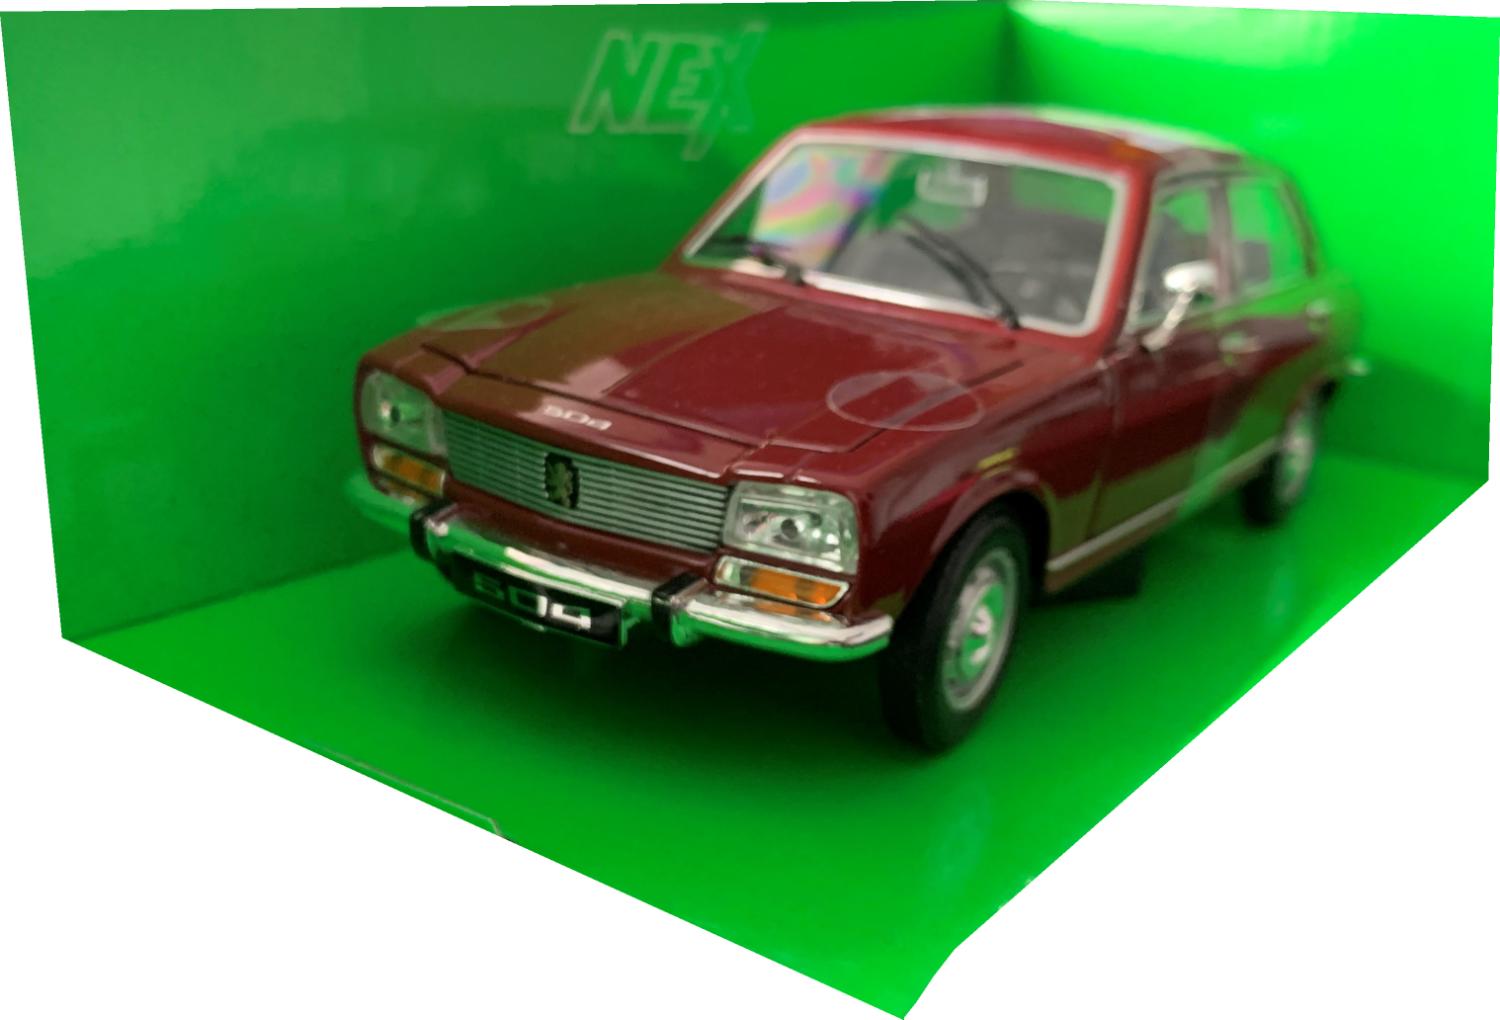 Peugeot 504 1975 in maroon 1:24 scale model from Welly